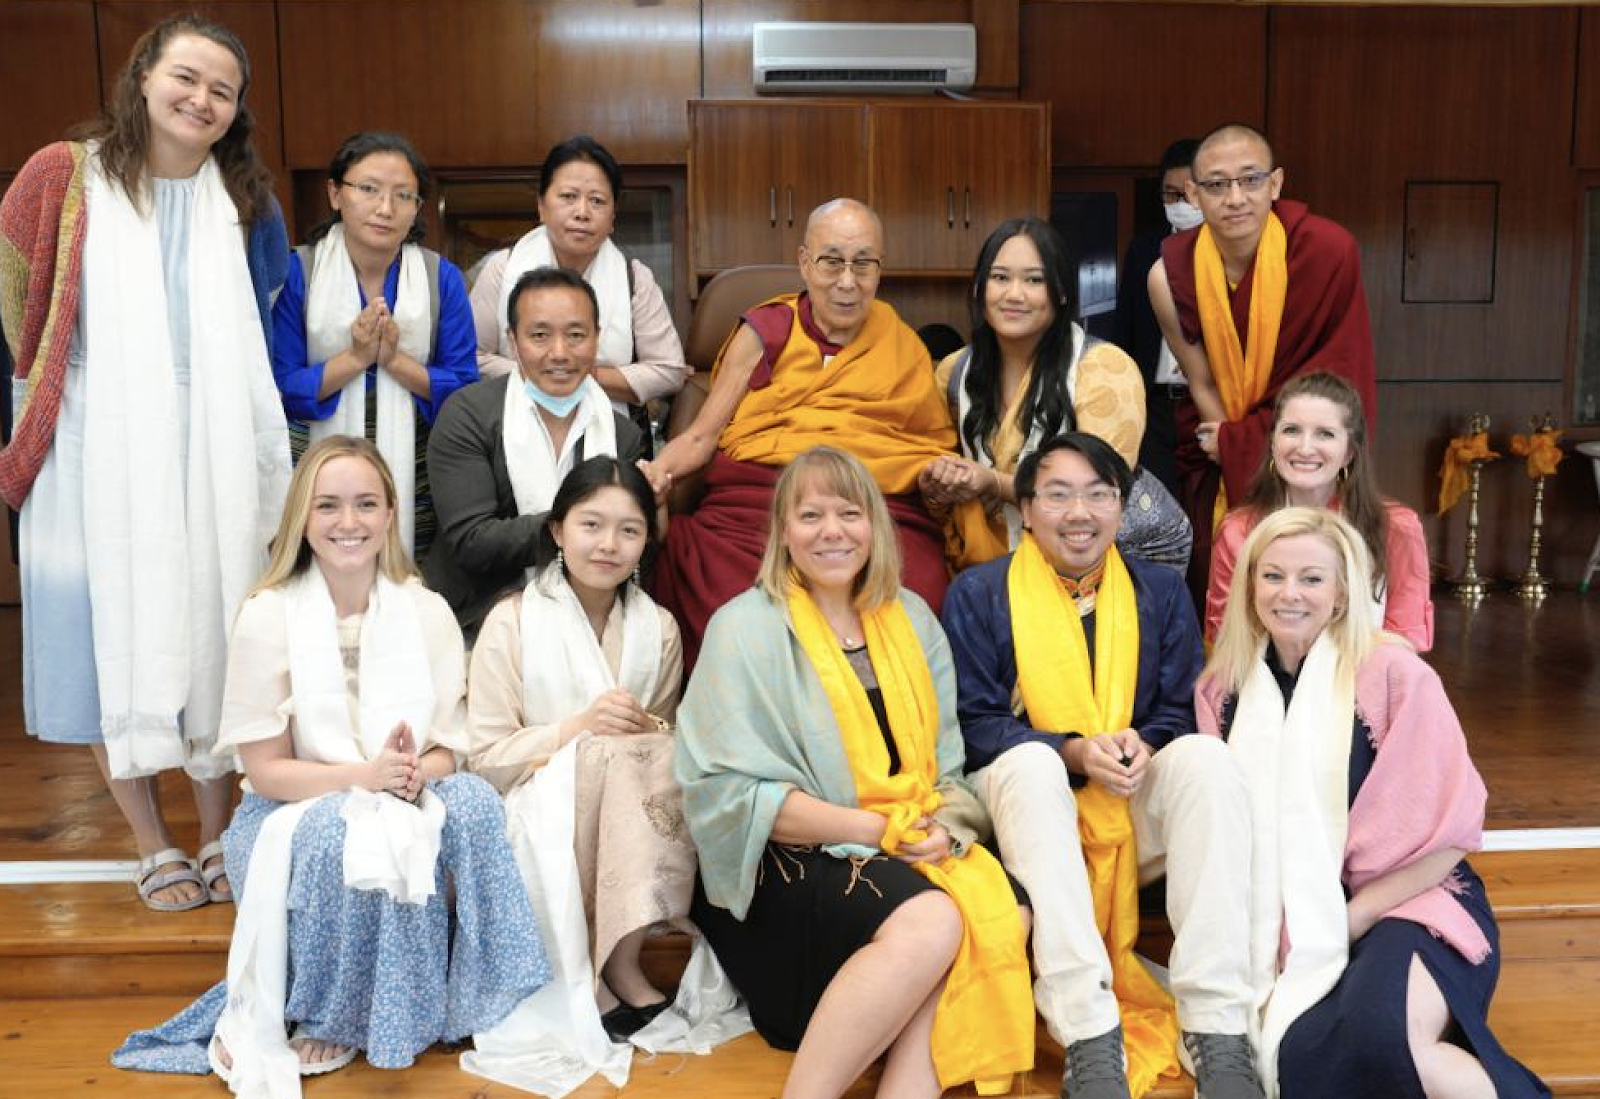 Group photo of Tenzin and Doctors from clinic